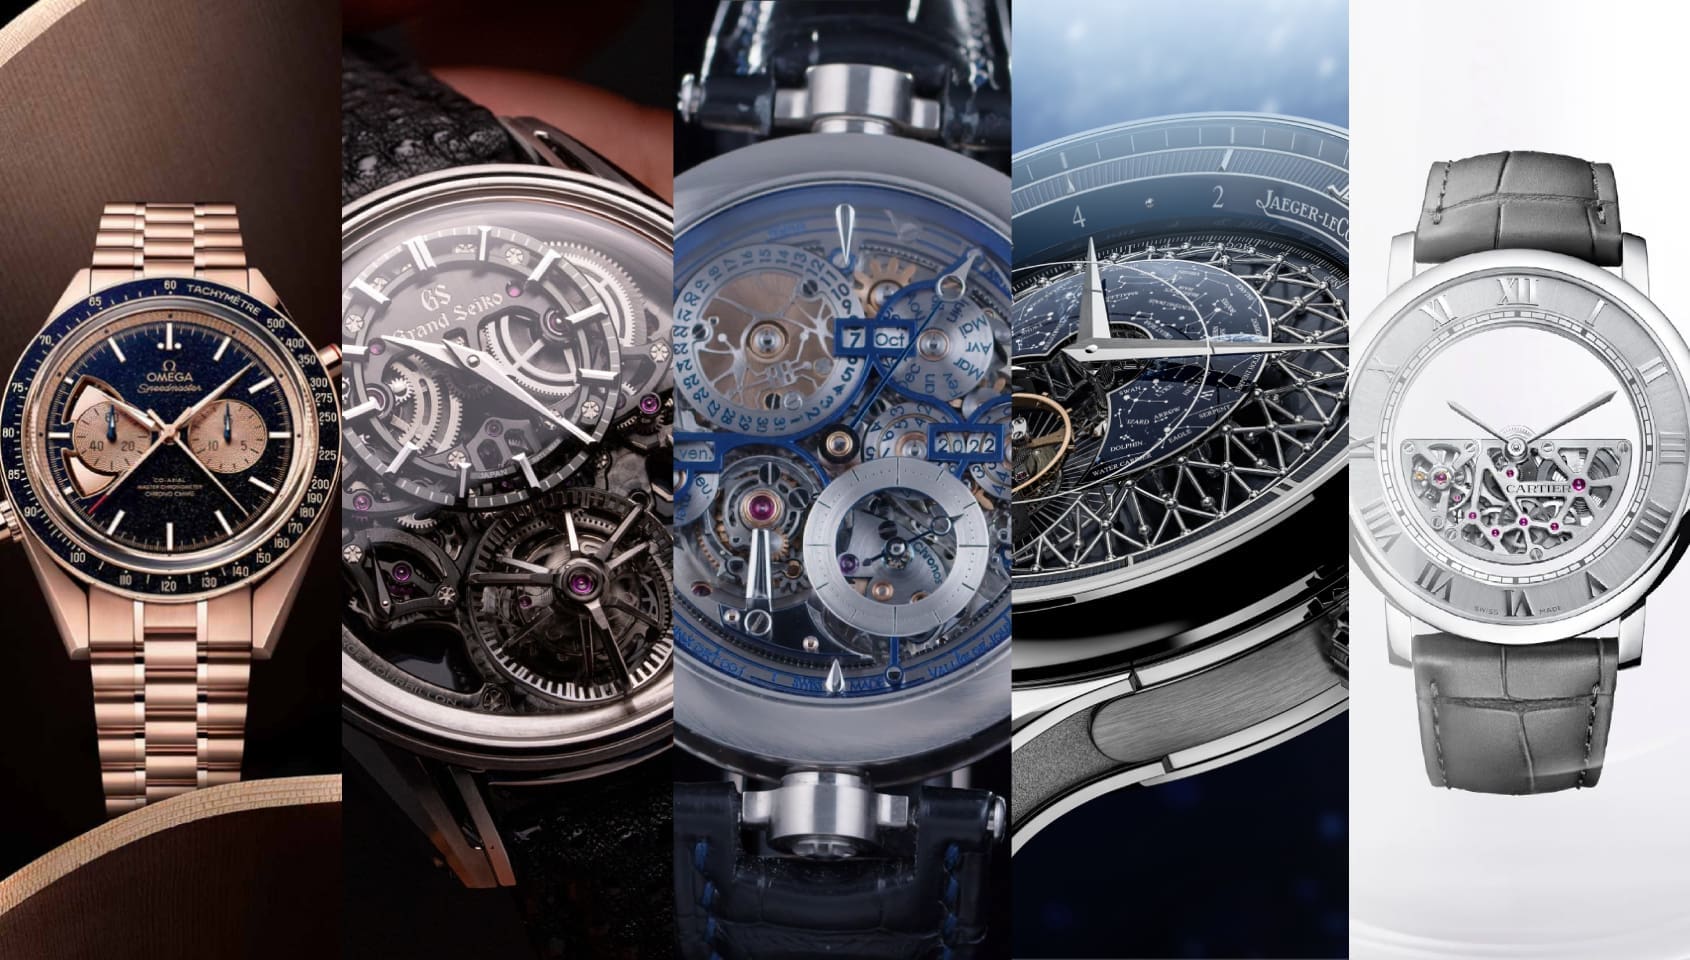 The 5 best high complication watches of 2022